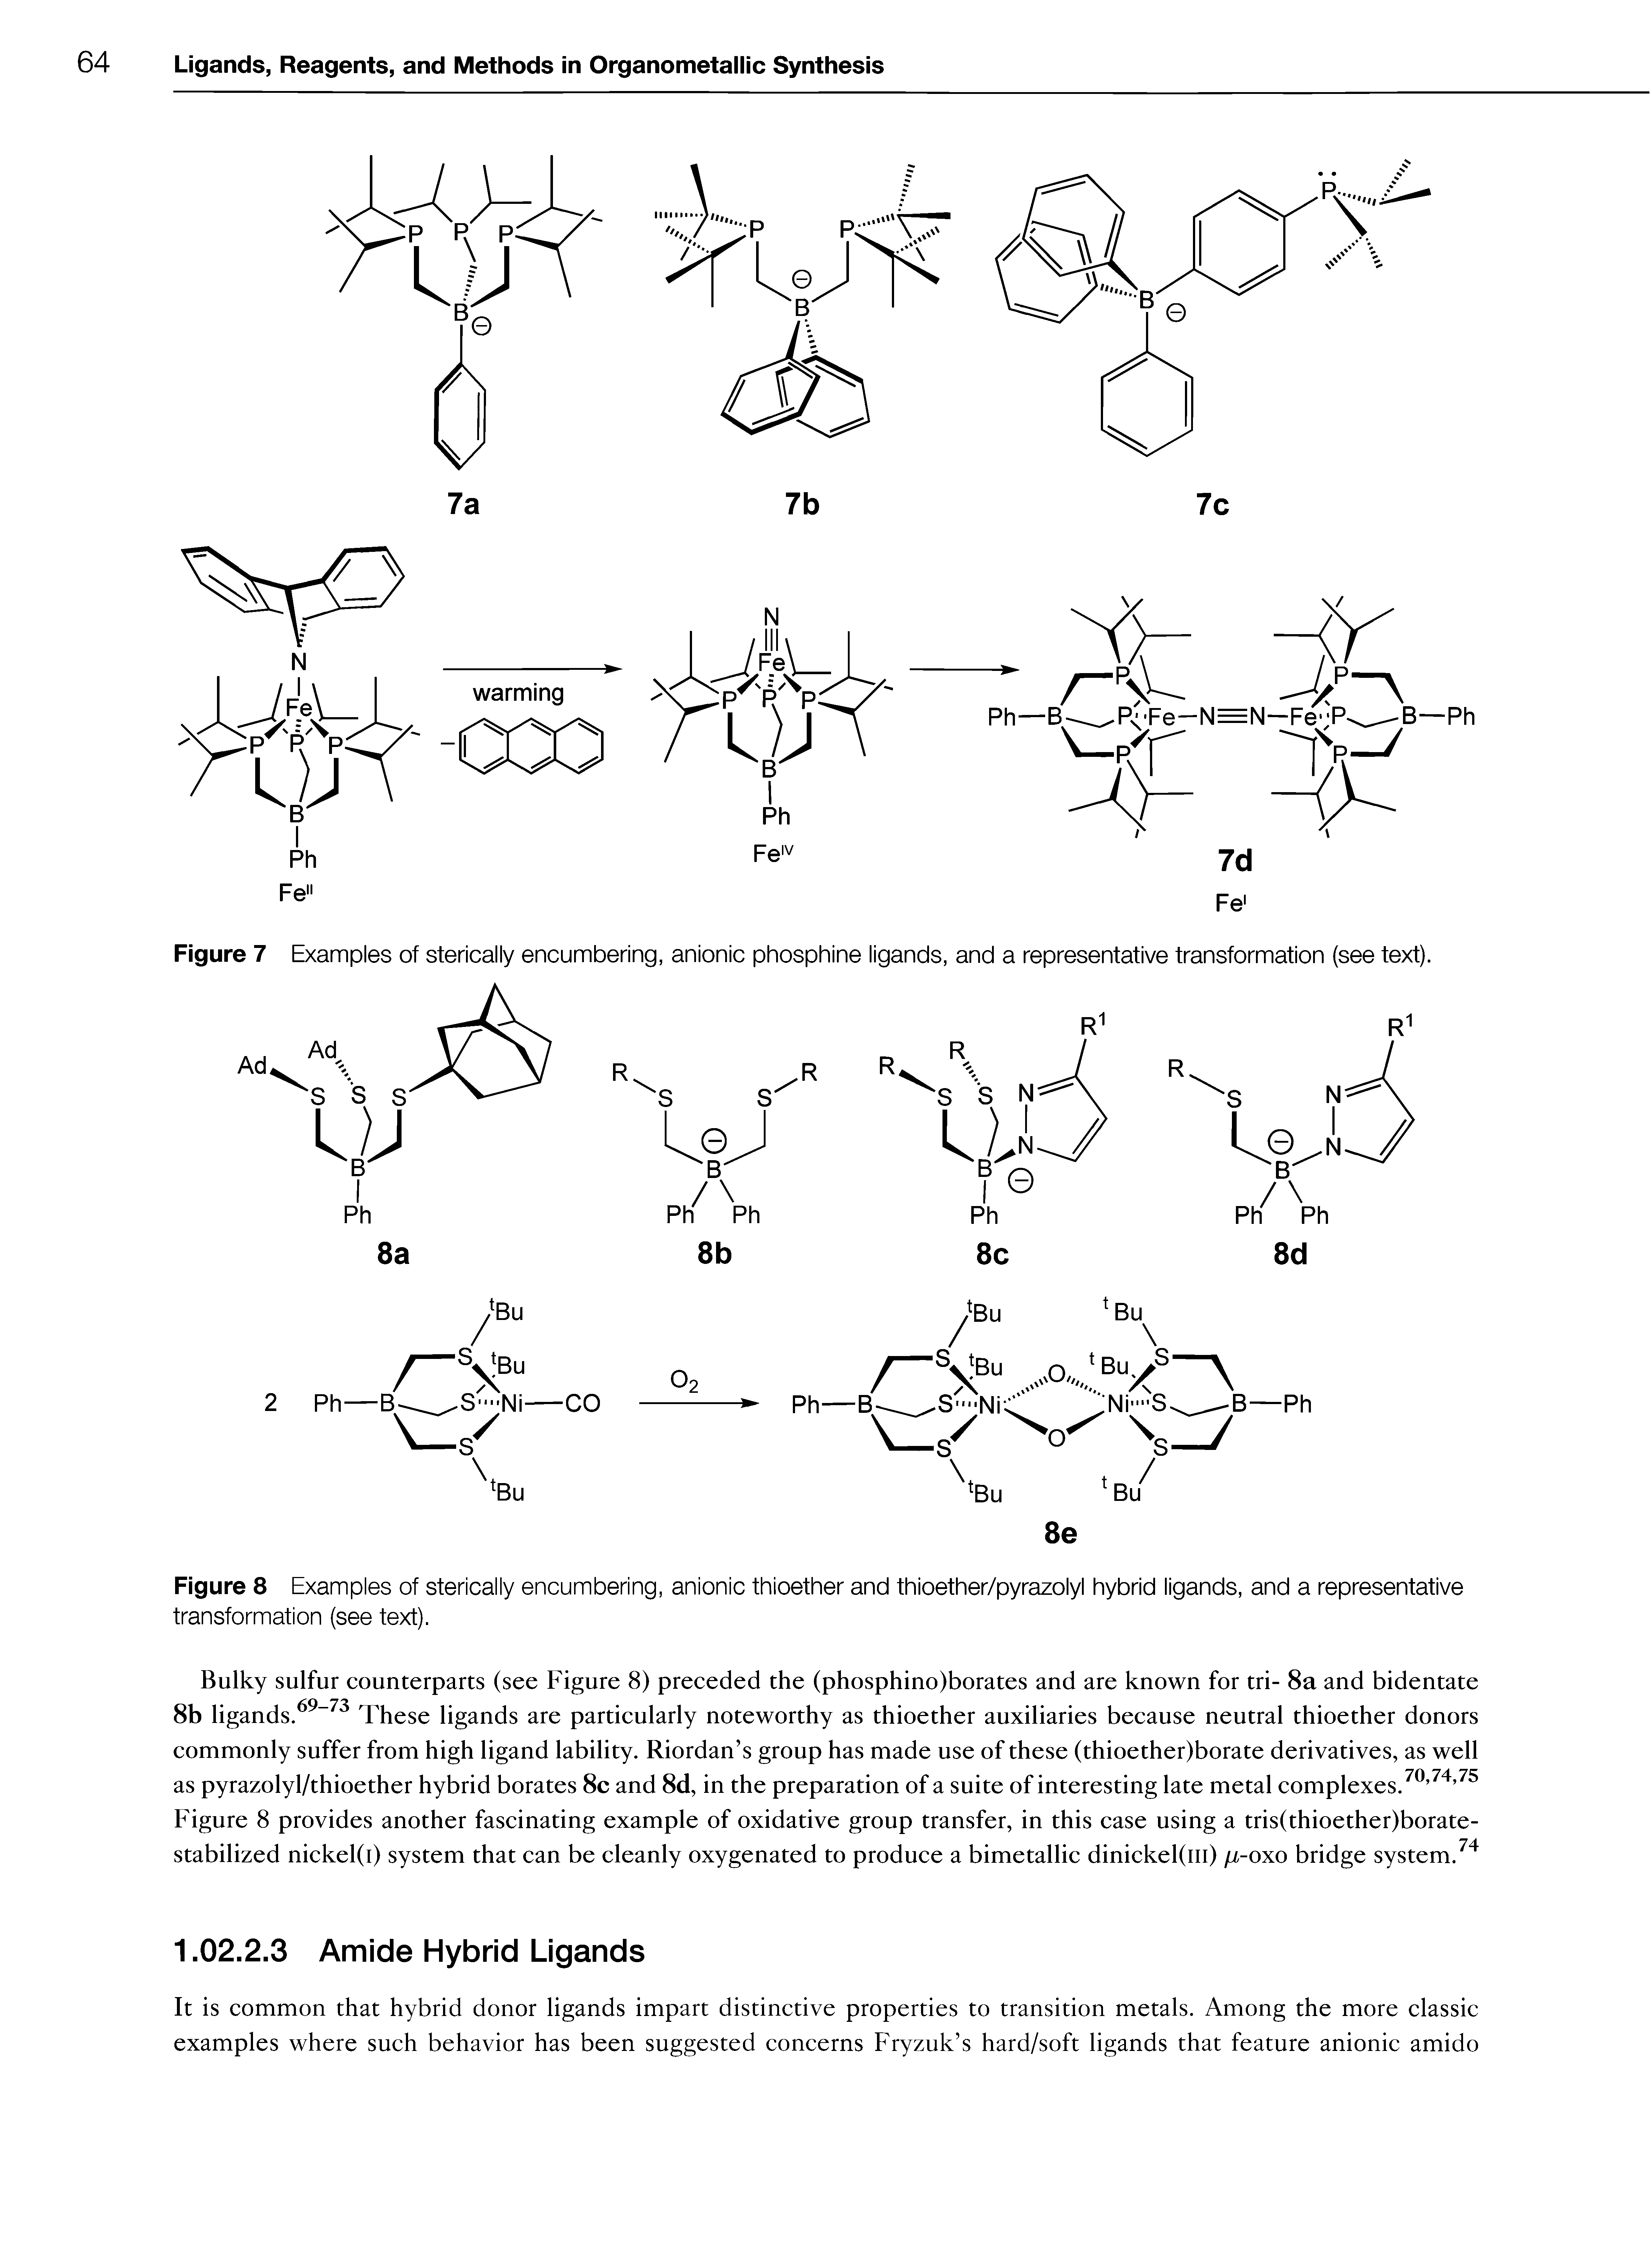 Figure 7 Examples of sterically encumbering, anionic phosphine ligands, and a representative transformation (see text).